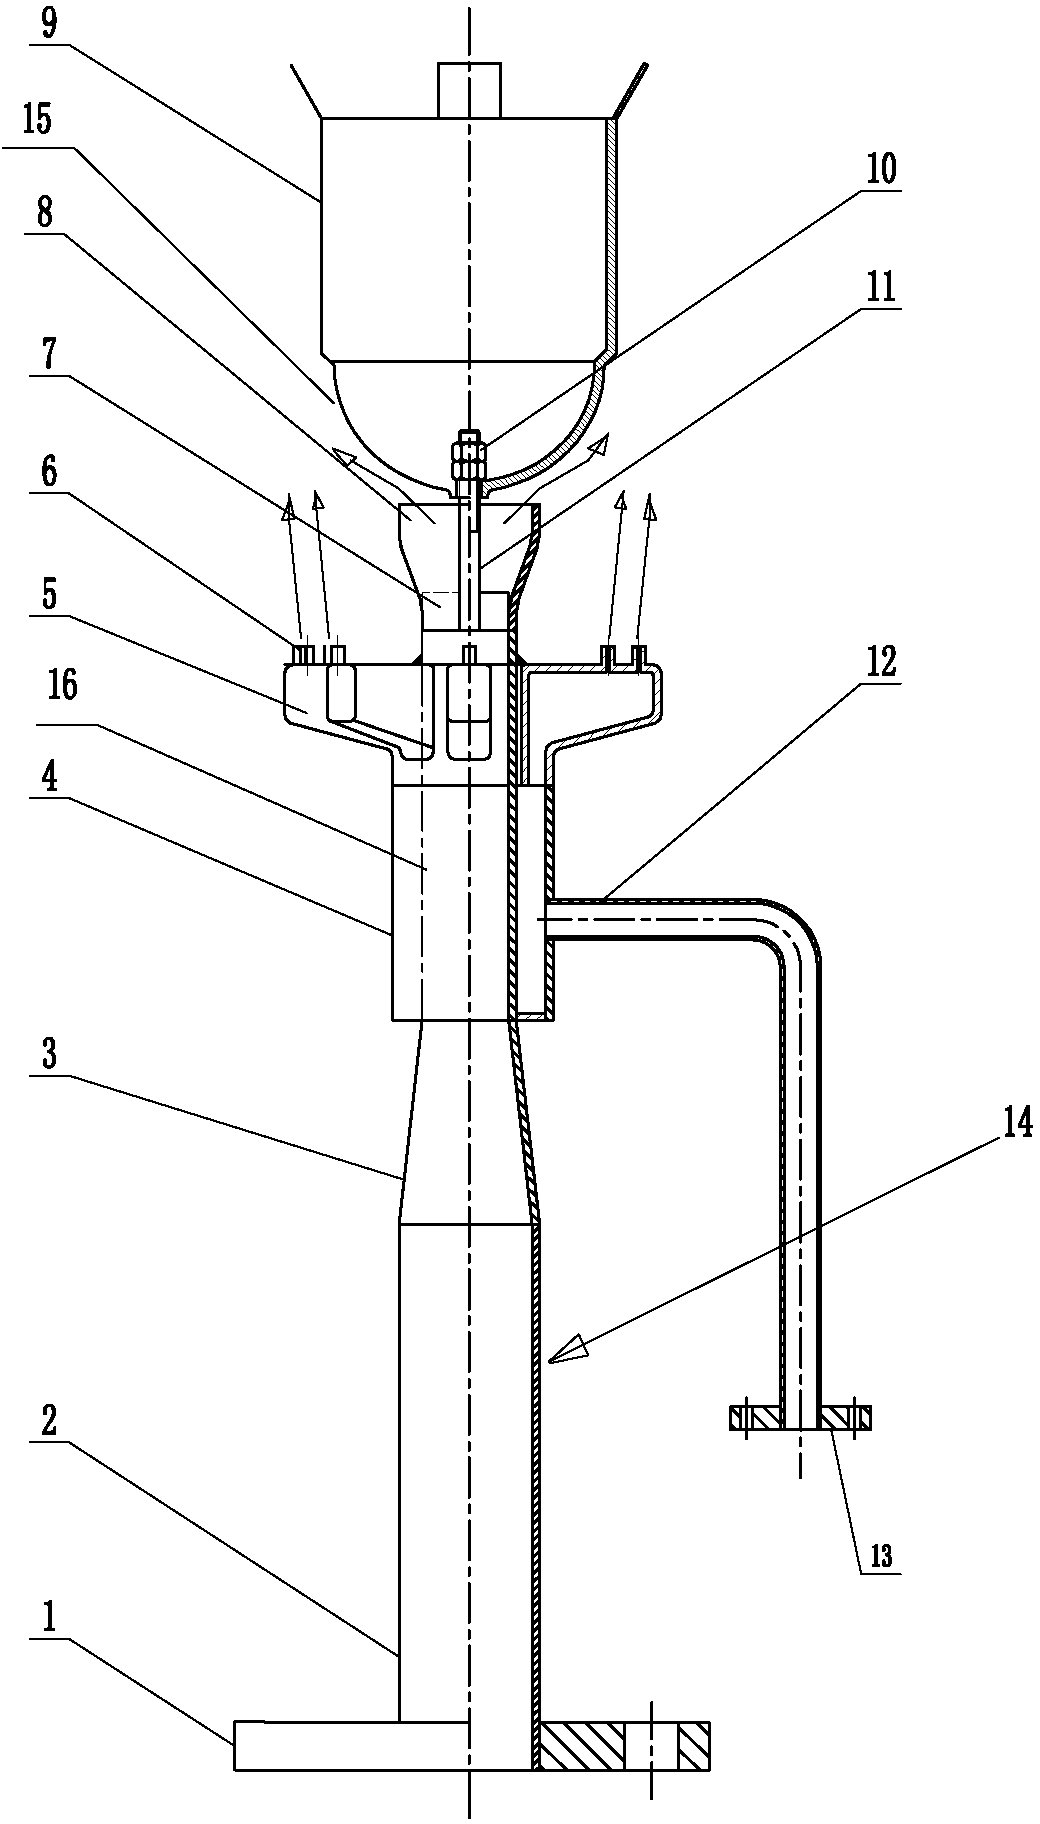 Ultra-low pressure flare gas burning device